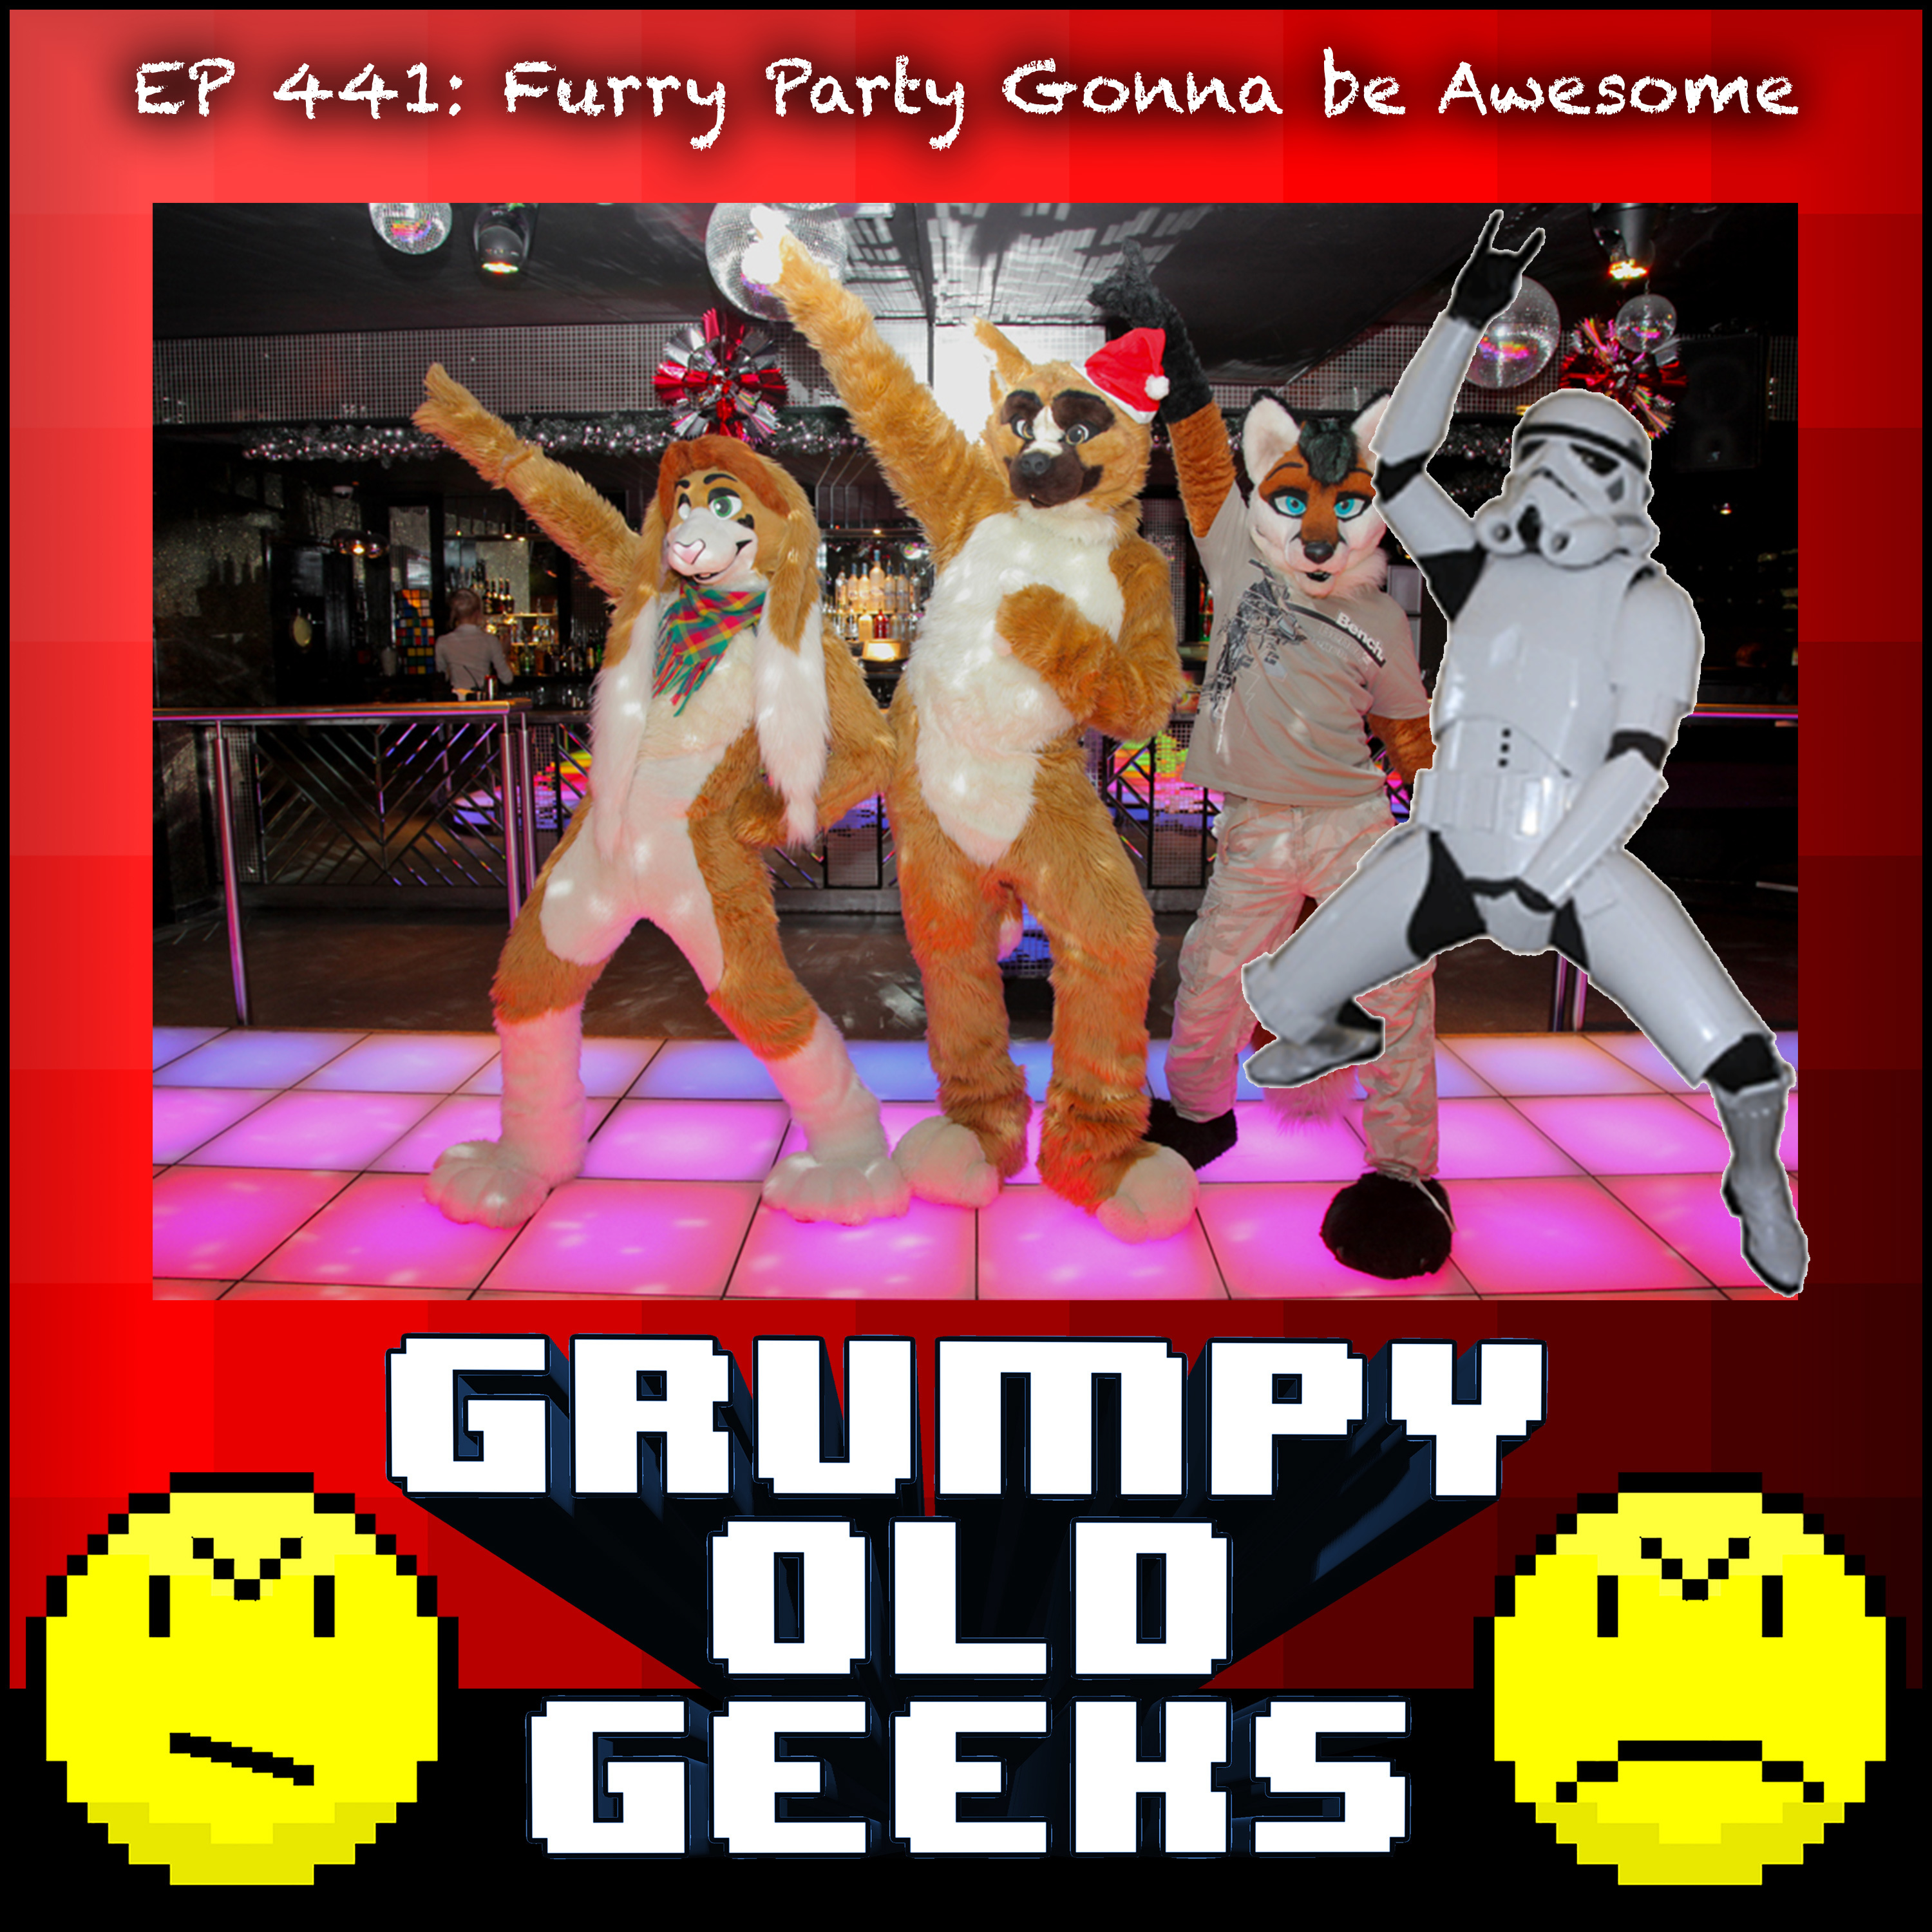 441: Furry Party Gonna be Awesome